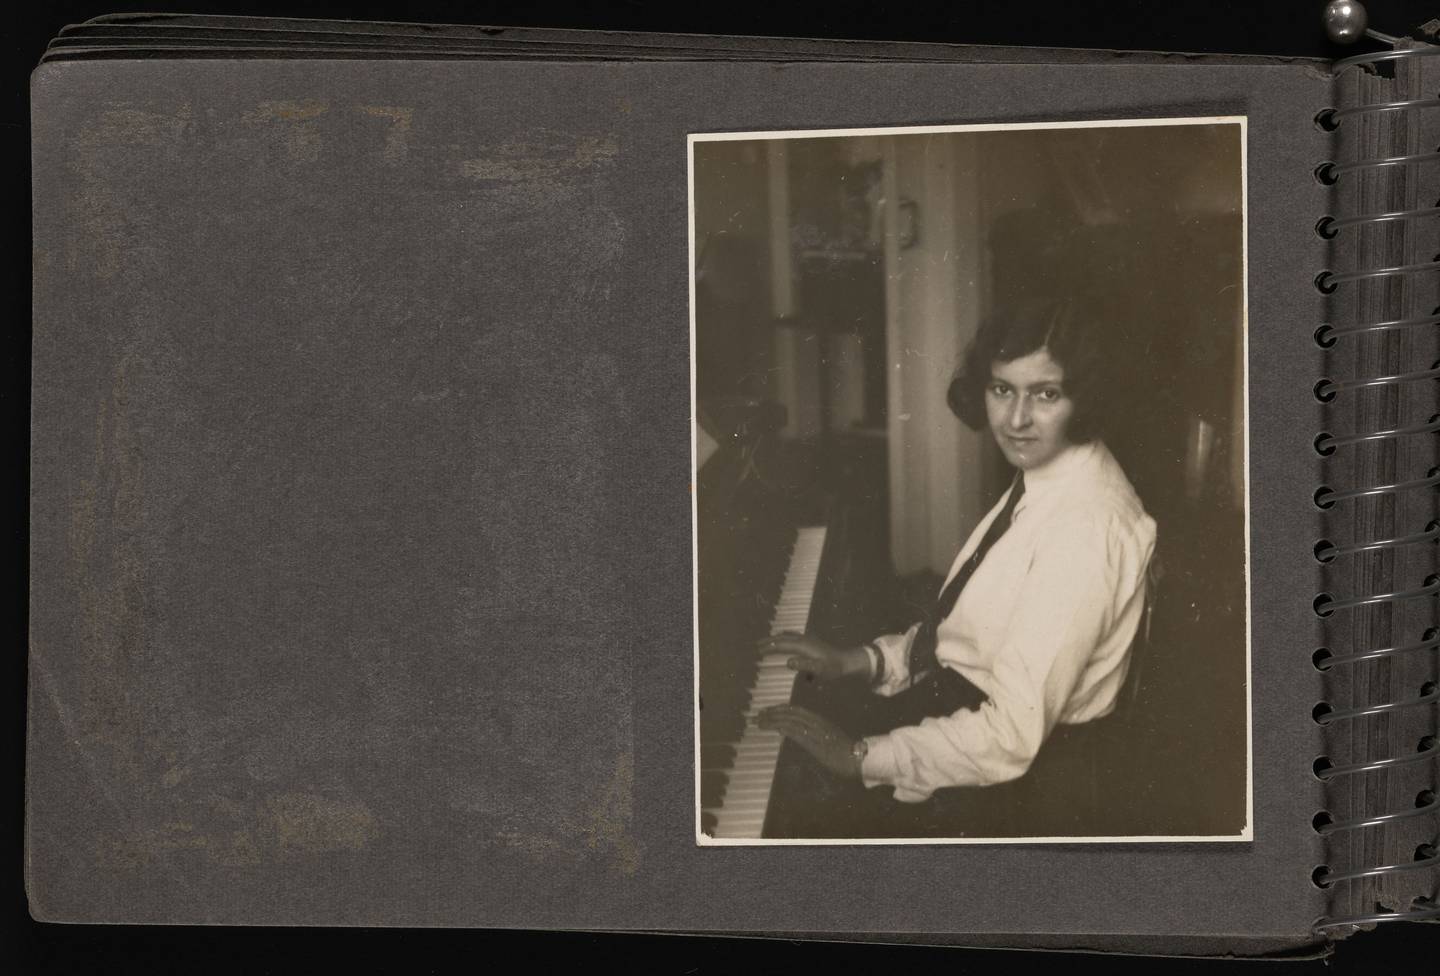 Undated photo of Agi Jambor, from her husband, Imre Patai's, diaries and albums.